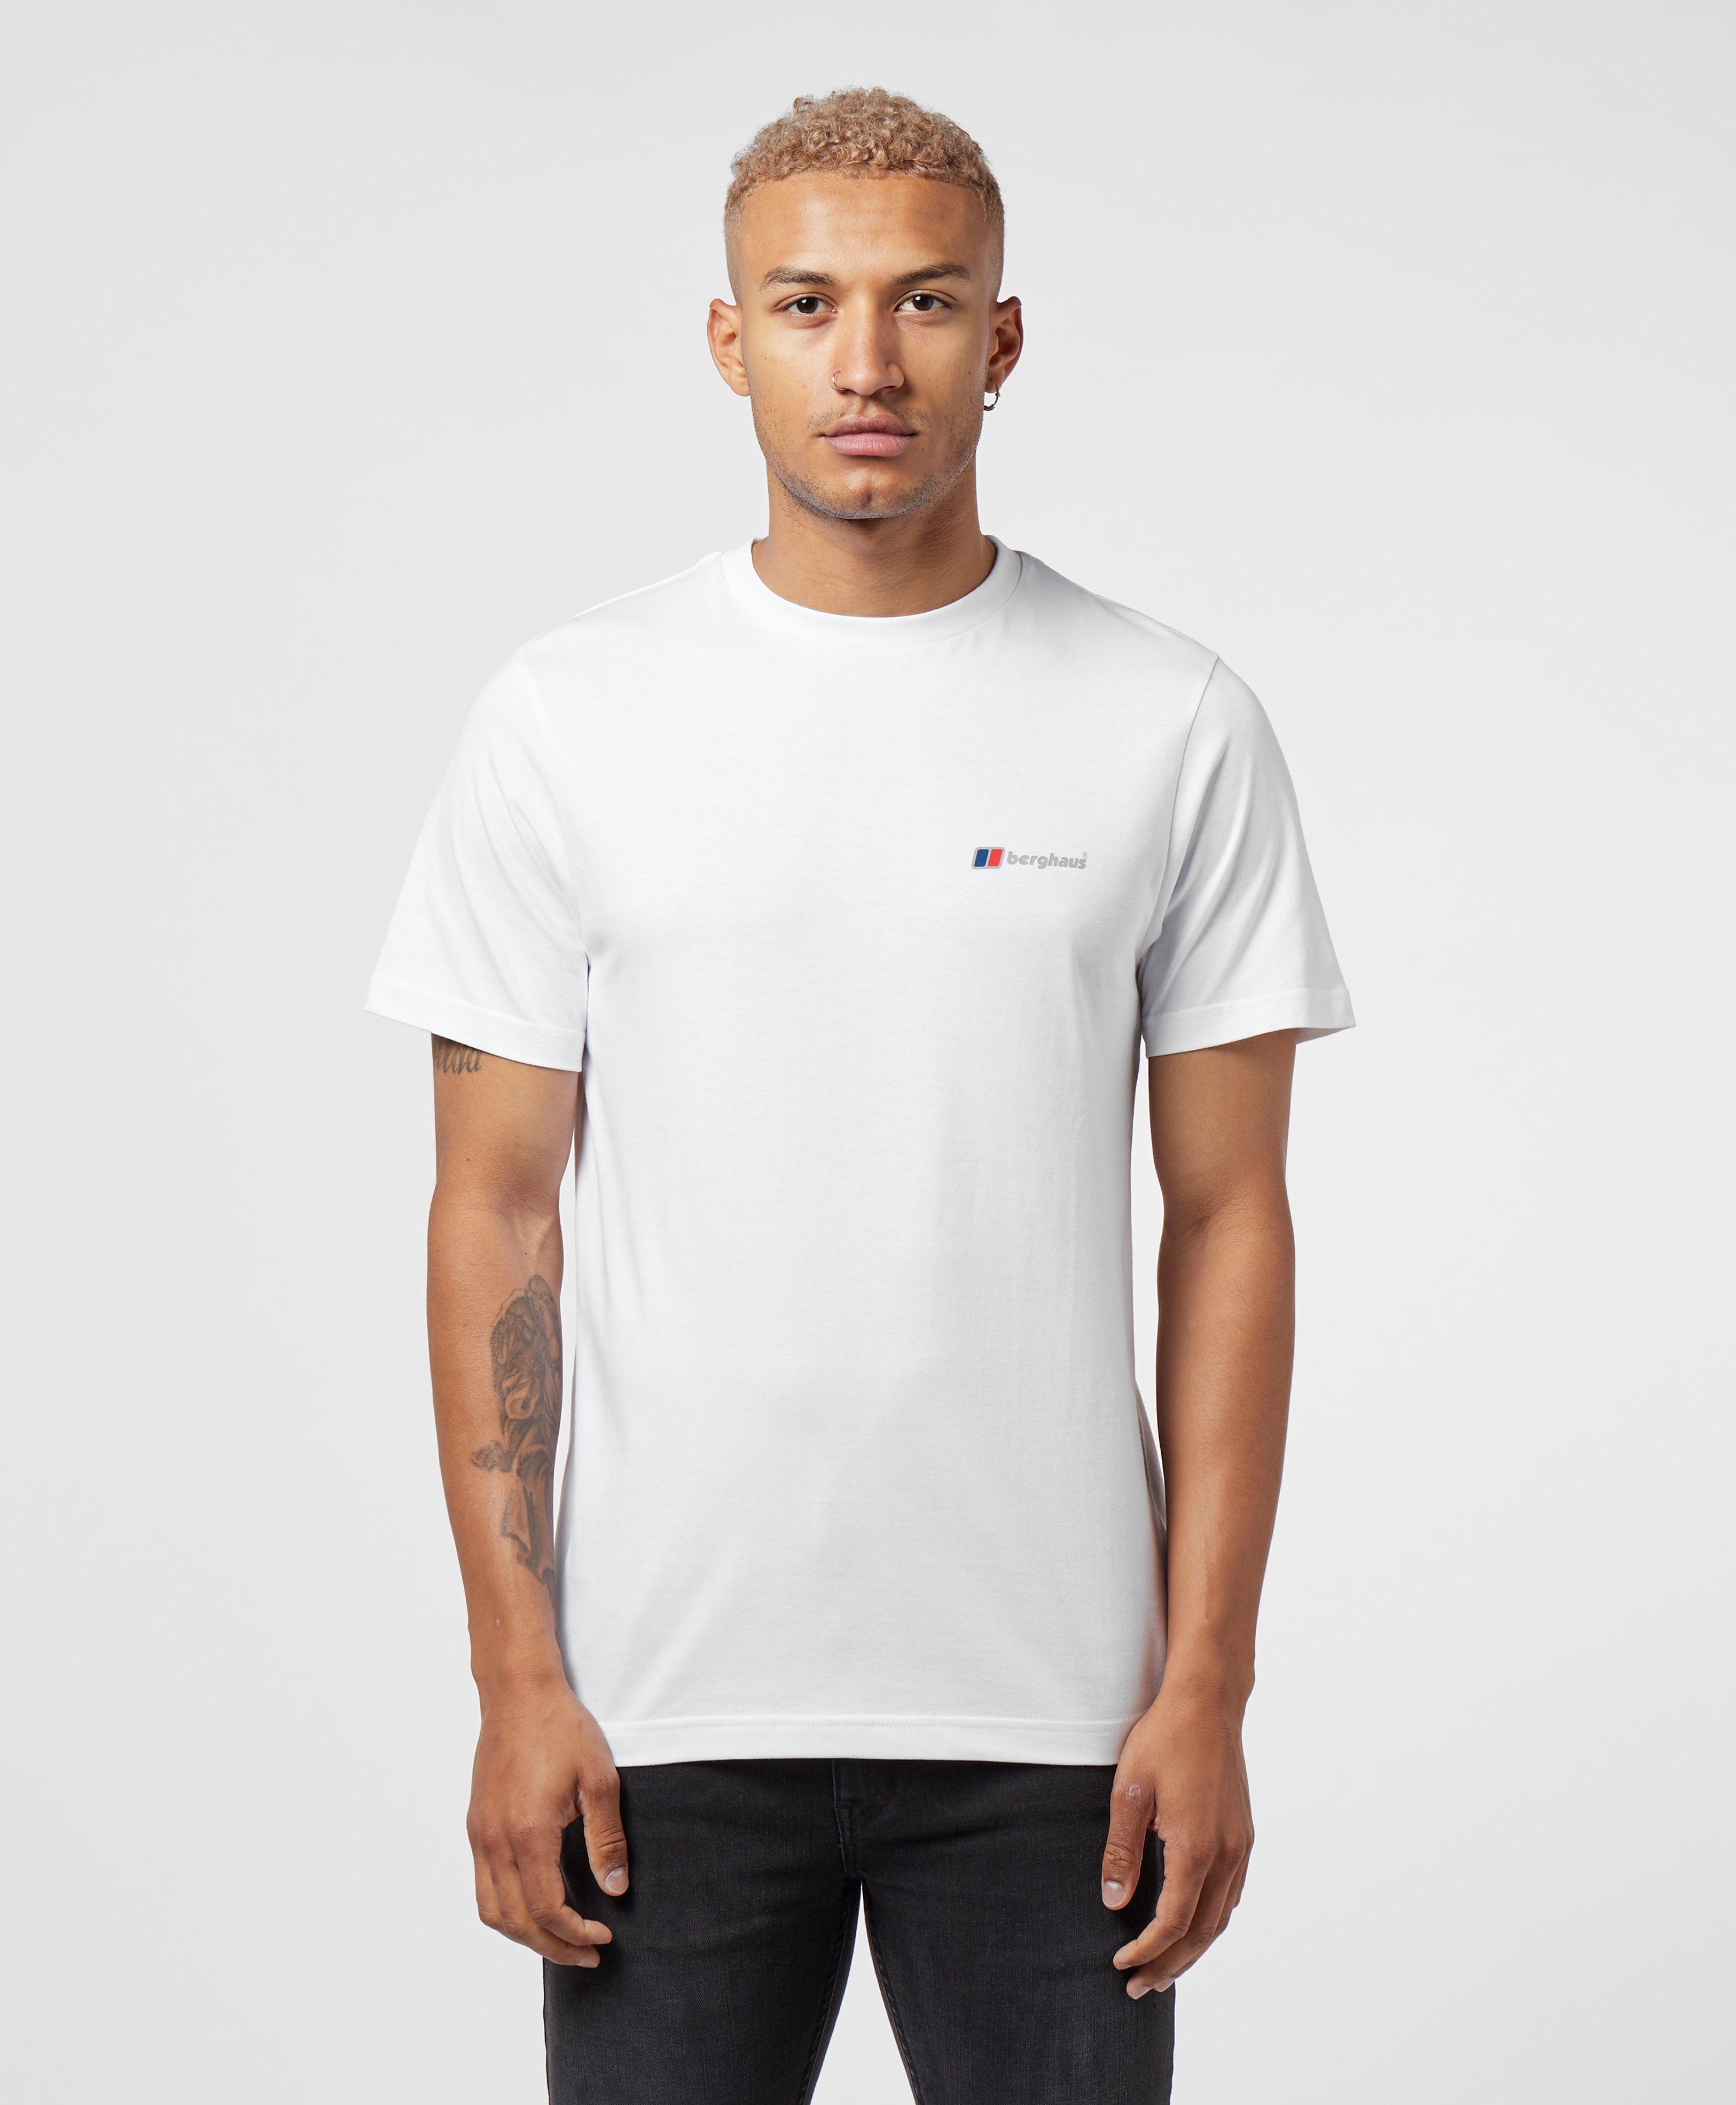 Berghaus Cotton Small Front Logo T-shirt in White for Men - Lyst